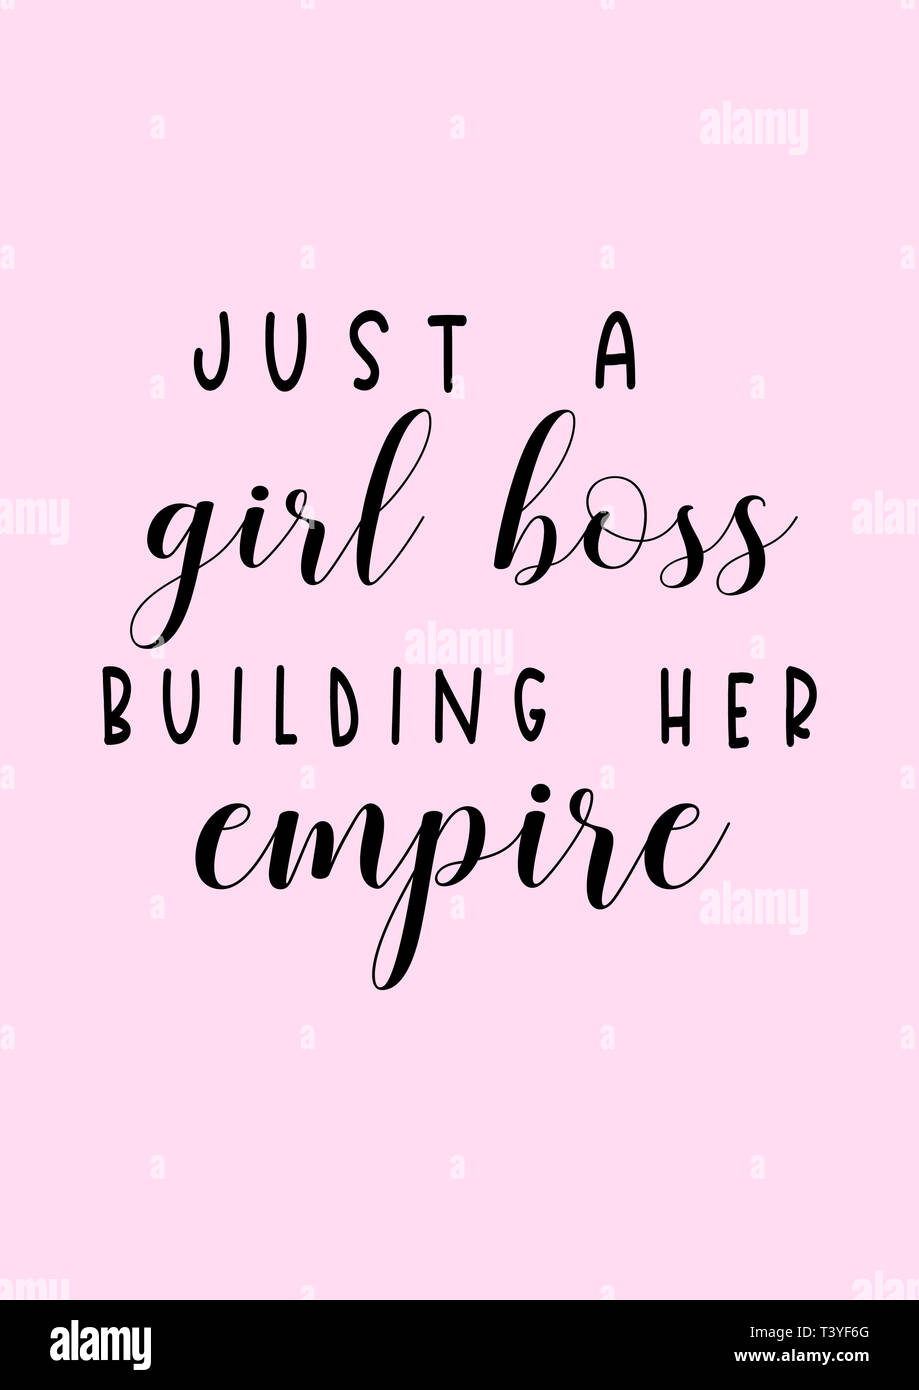 Just A Girl Boss Building Her Empire Girly Quote With Pink